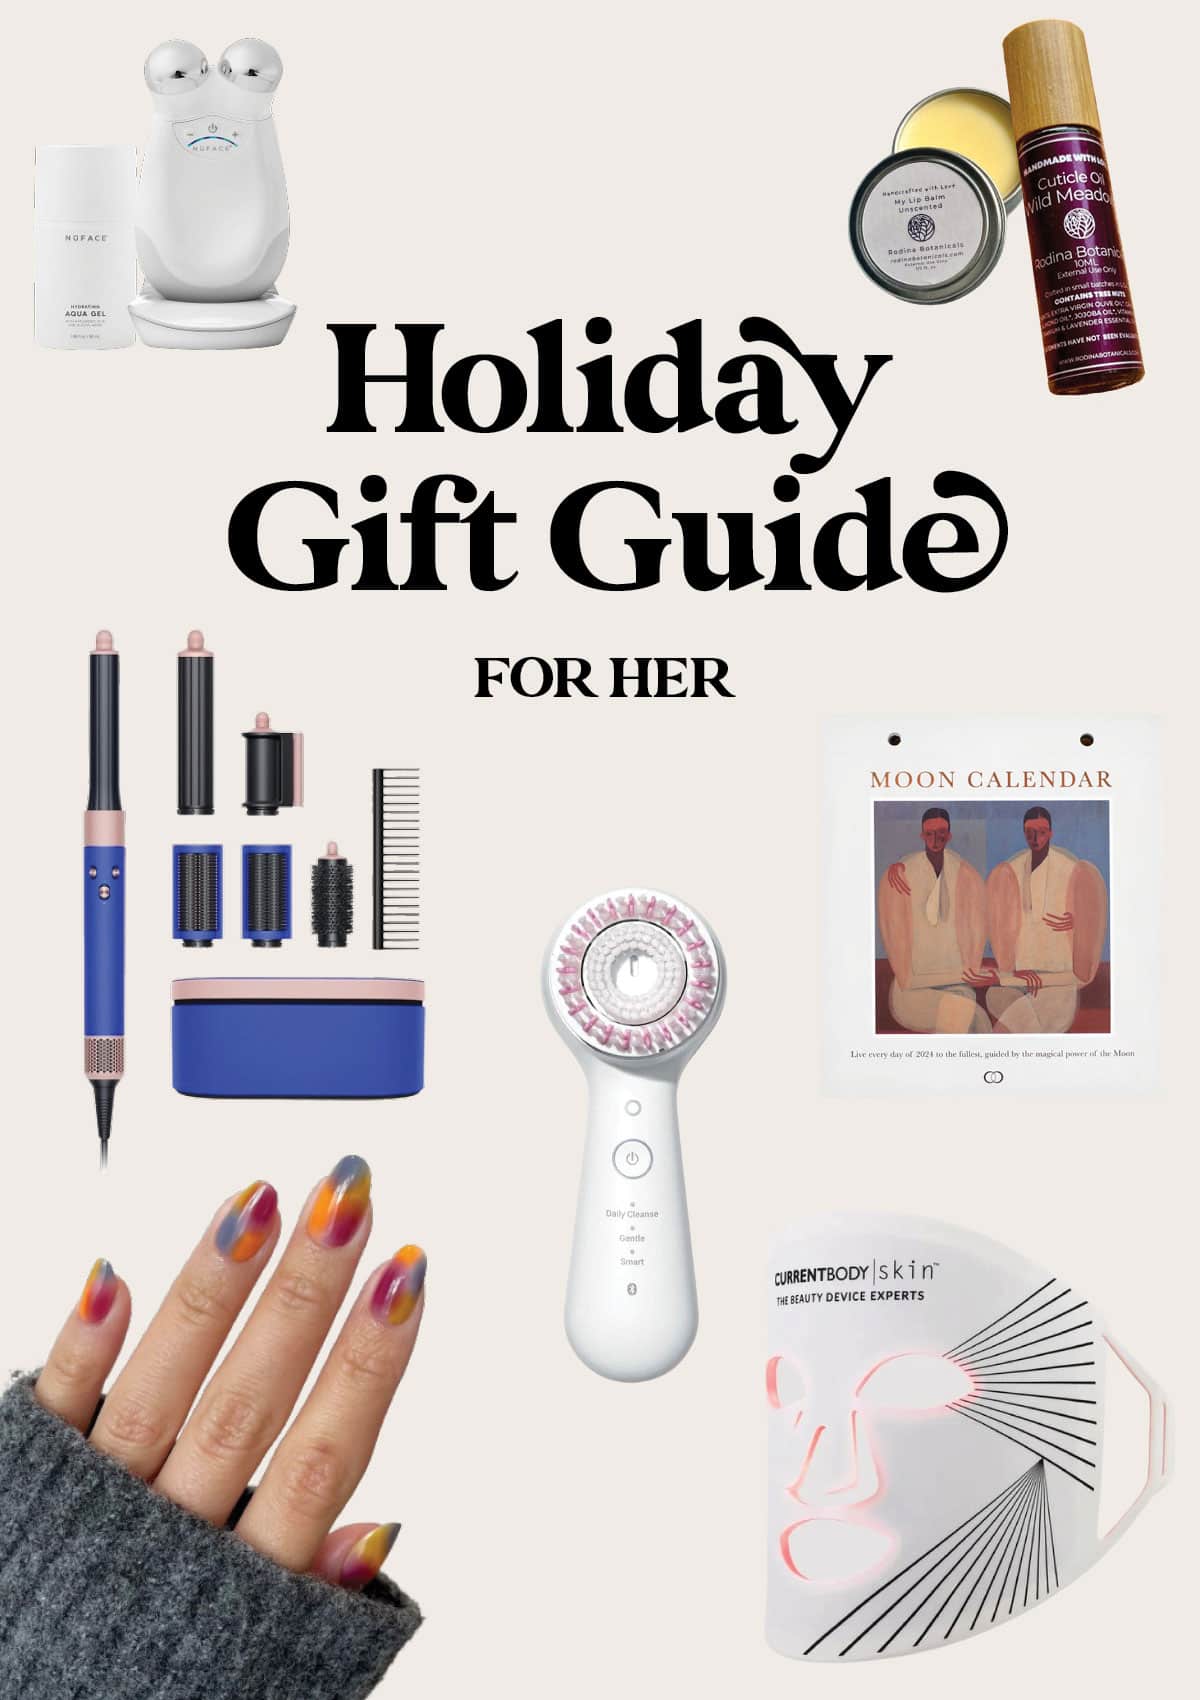 Best Gift Ideas For Women - The Perfect Beauty and Self Care Presents I scoured the internet for the best beauty producst and self care items.